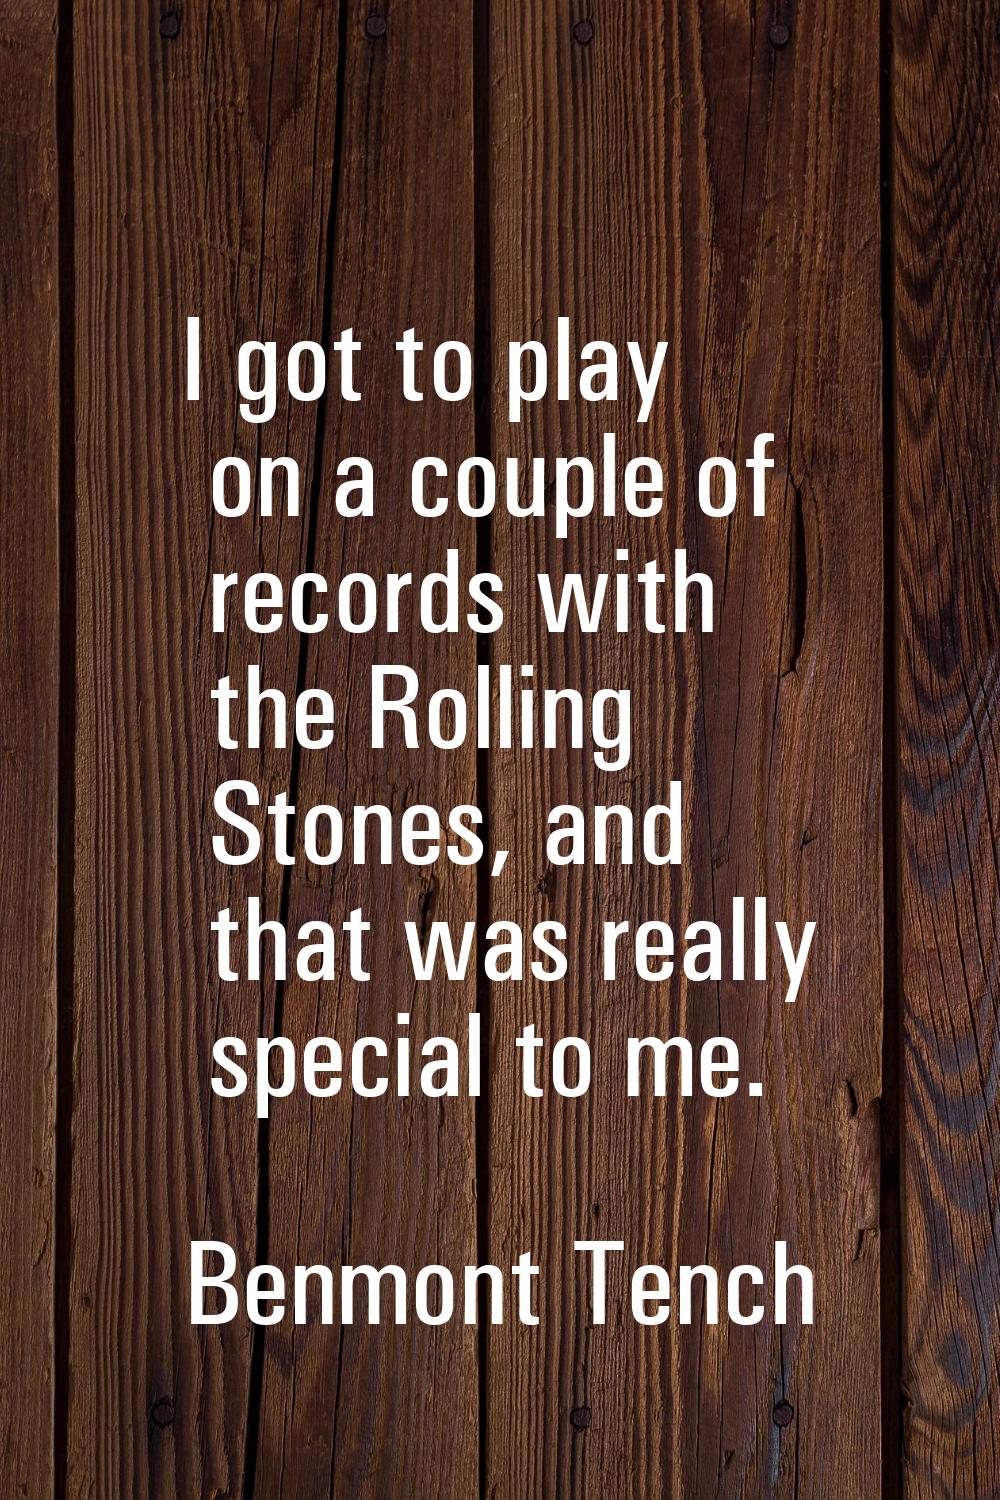 I got to play on a couple of records with the Rolling Stones, and that was really special to me.